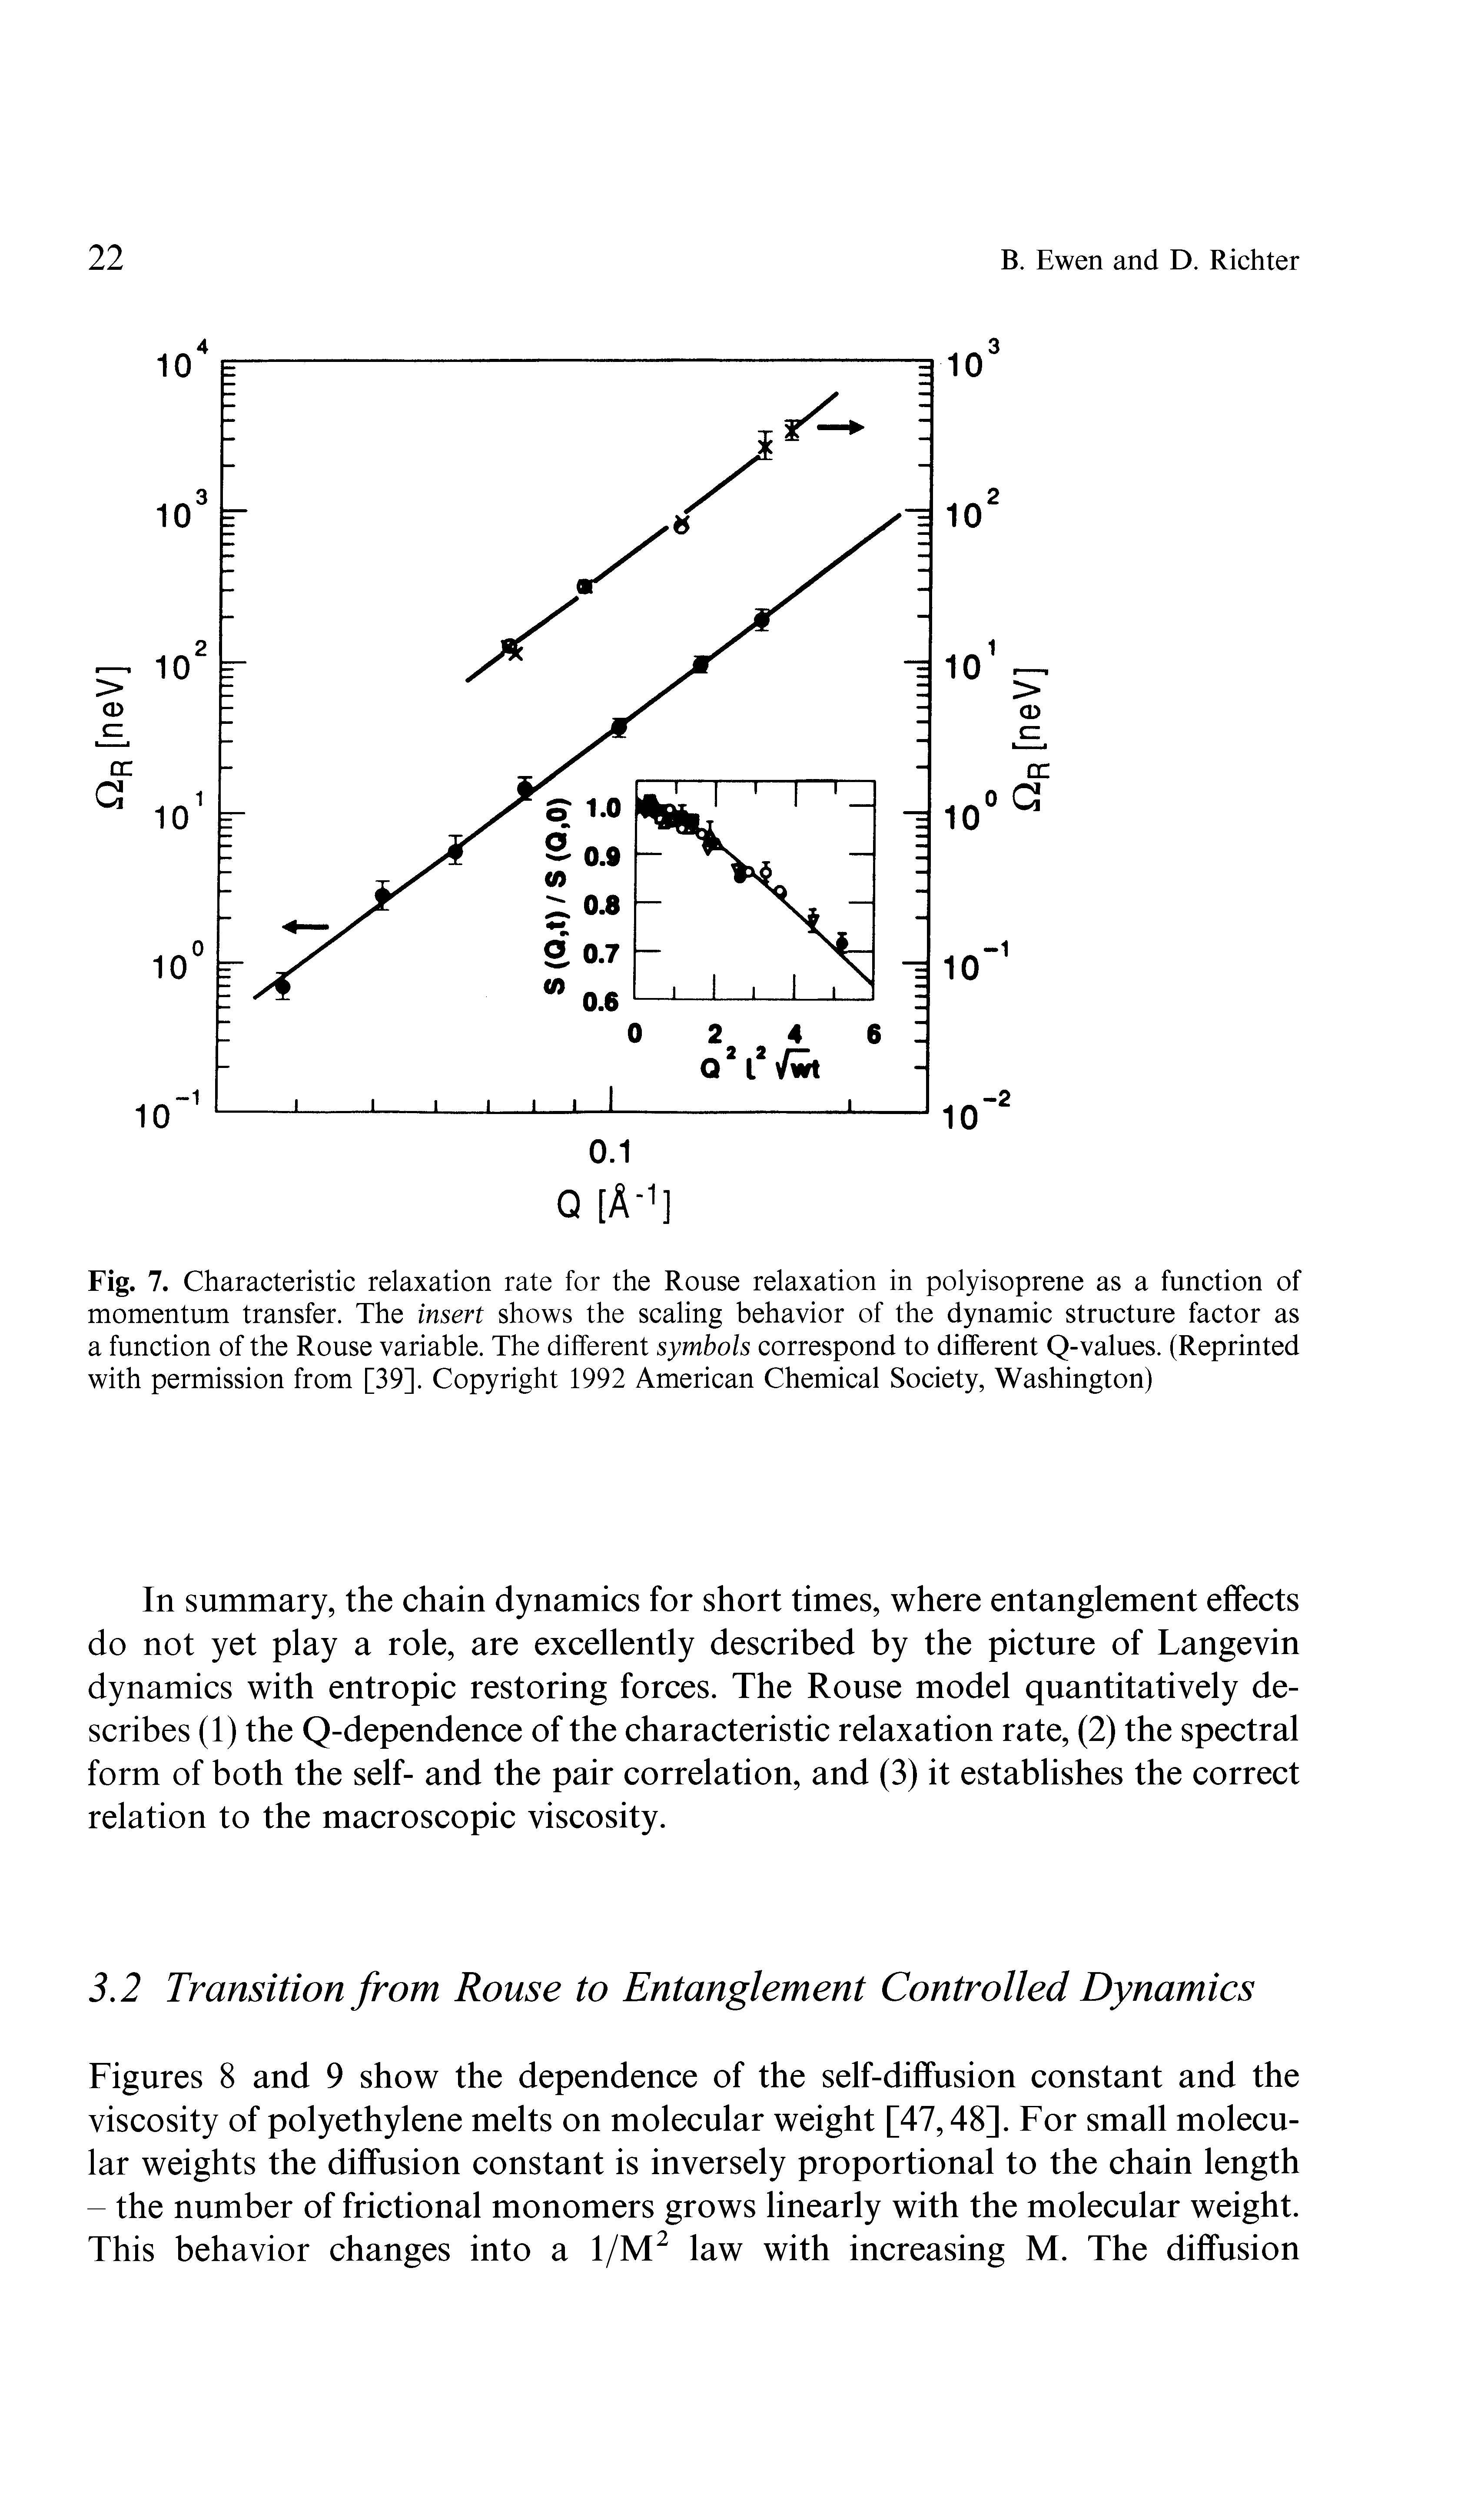 Fig. 7. Characteristic relaxation rate for the Rouse relaxation in polyisoprene as a function of momentum transfer. The insert shows the scaling behavior of the dynamic structure factor as a function of the Rouse variable. The different symbols correspond to different Q-values. (Reprinted with permission from [39]. Copyright 1992 American Chemical Society, Washington)...